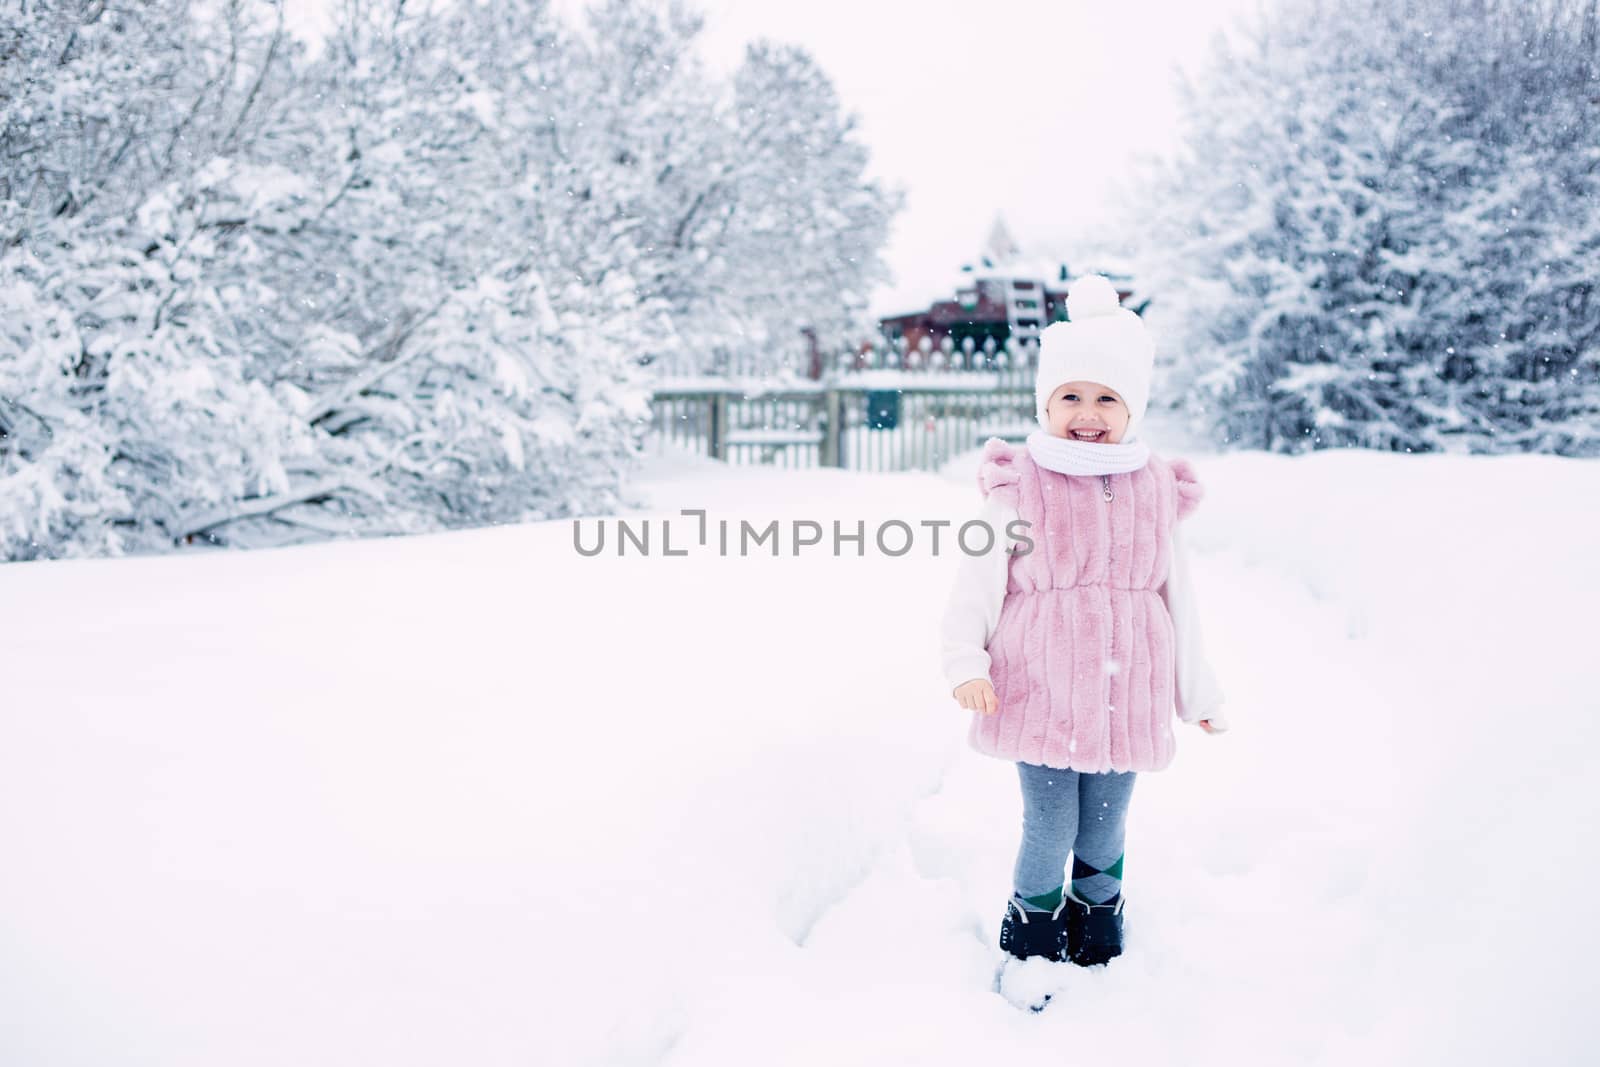 .A little girl in a pink fur coat stands in the middle of a snow-covered park on a cloudy winter day